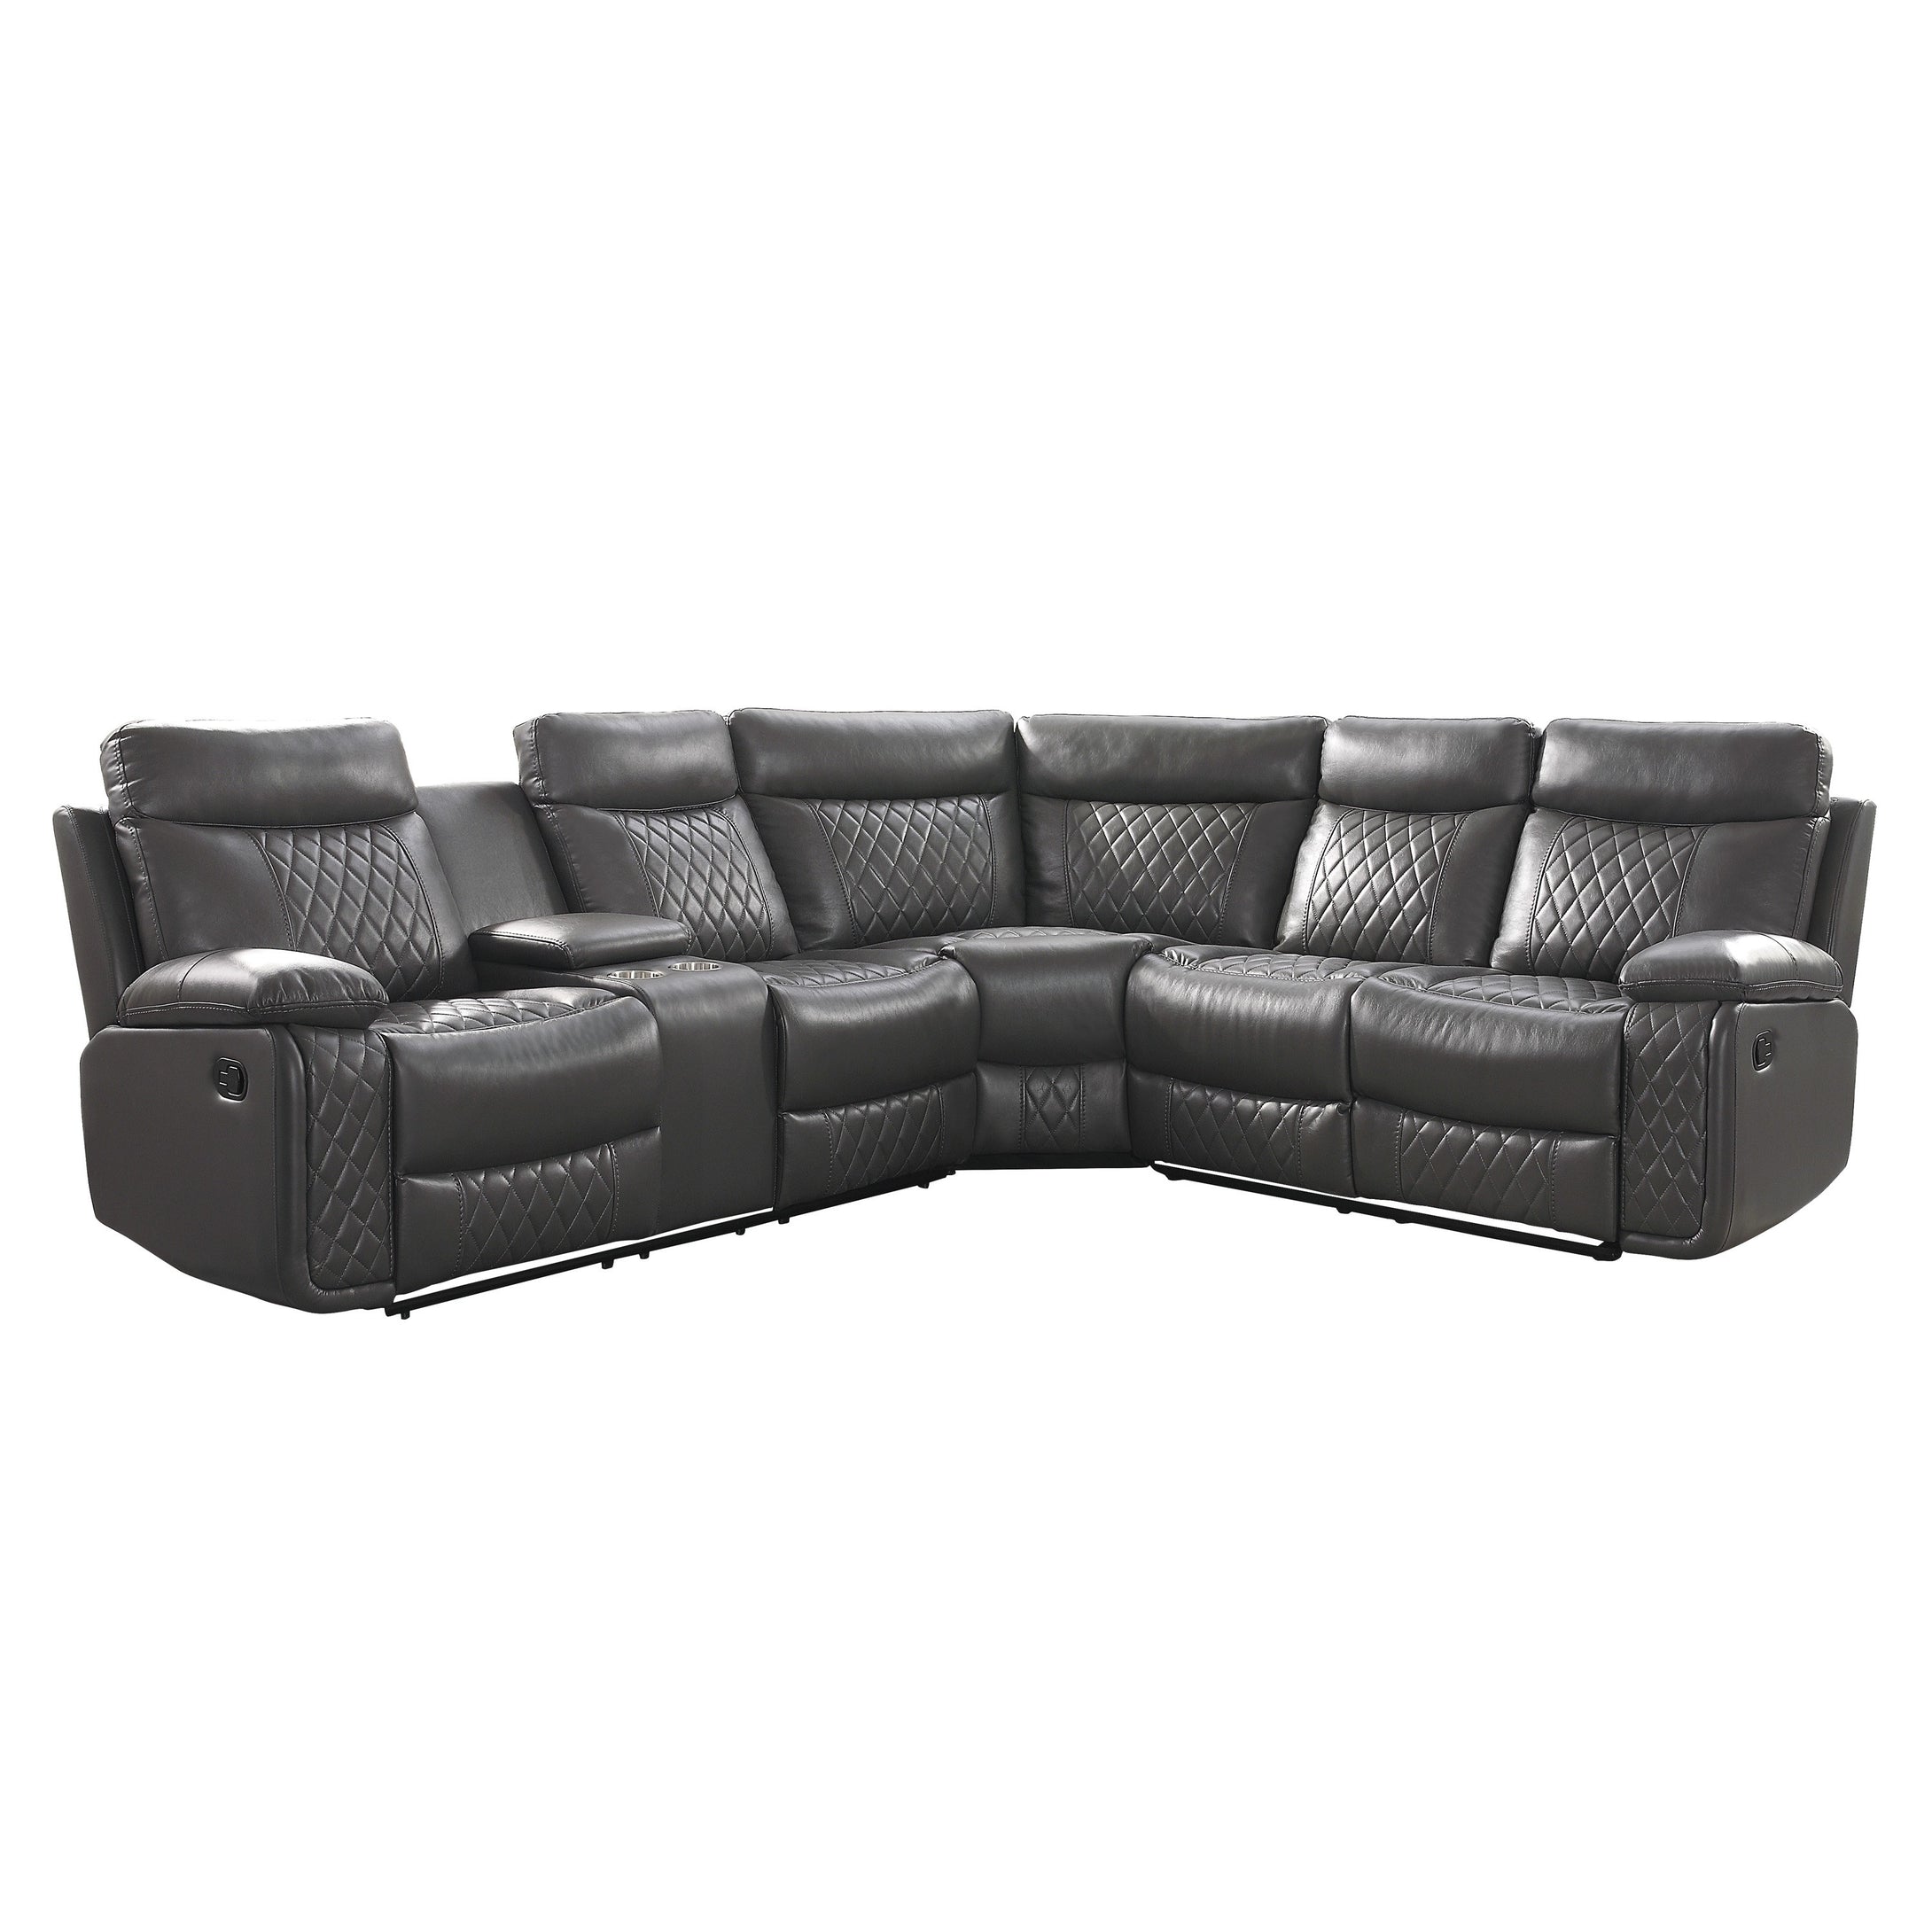 9599GRY*SC 3-Piece Reclining Sectional